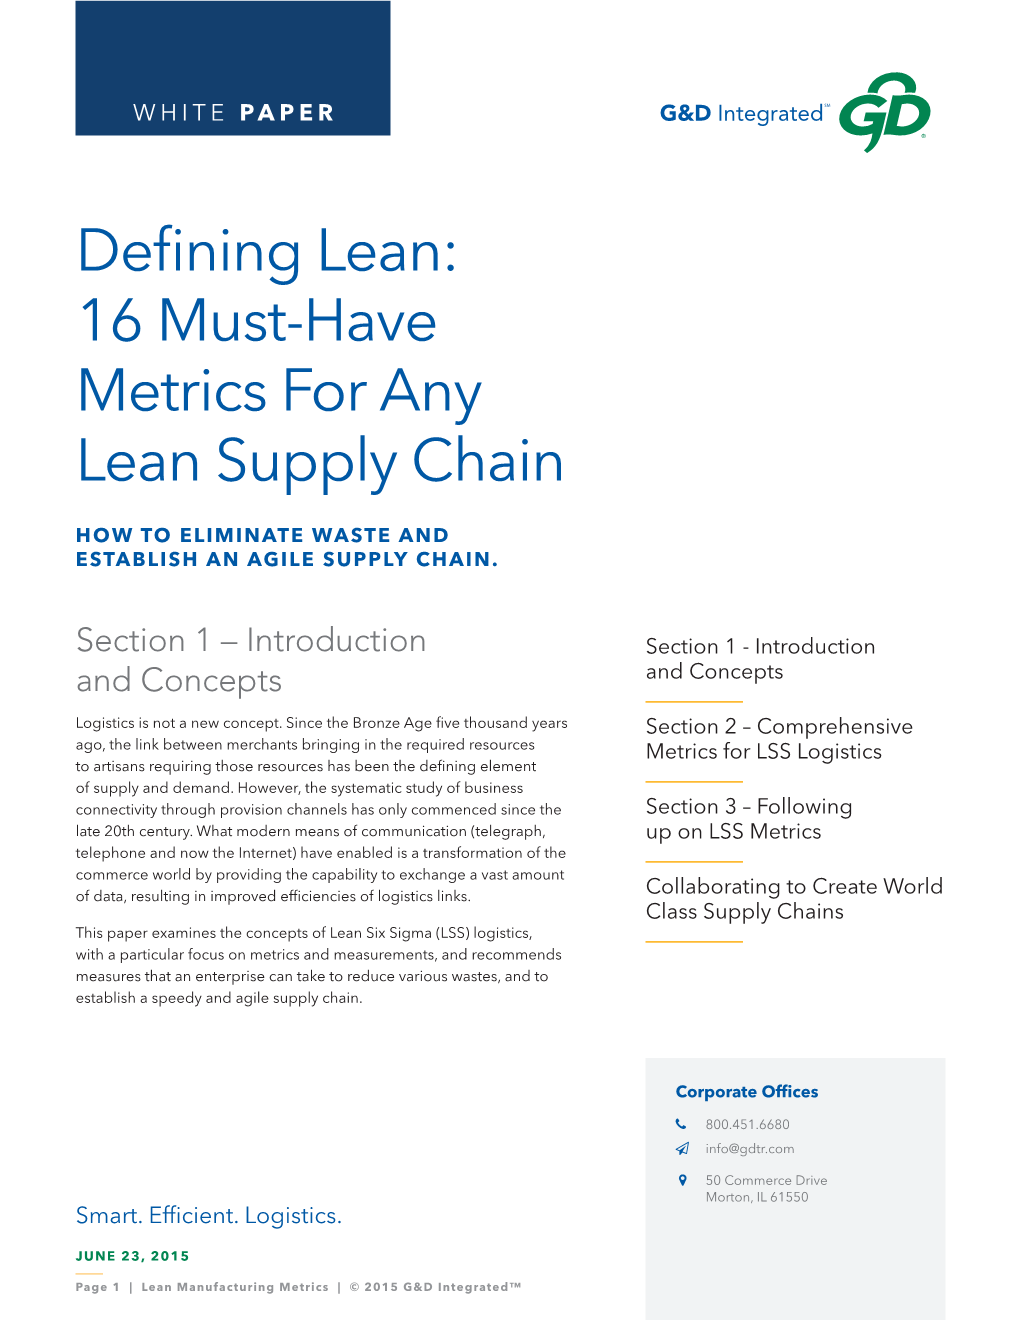 16 Must-Have Metrics for Any Lean Supply Chain